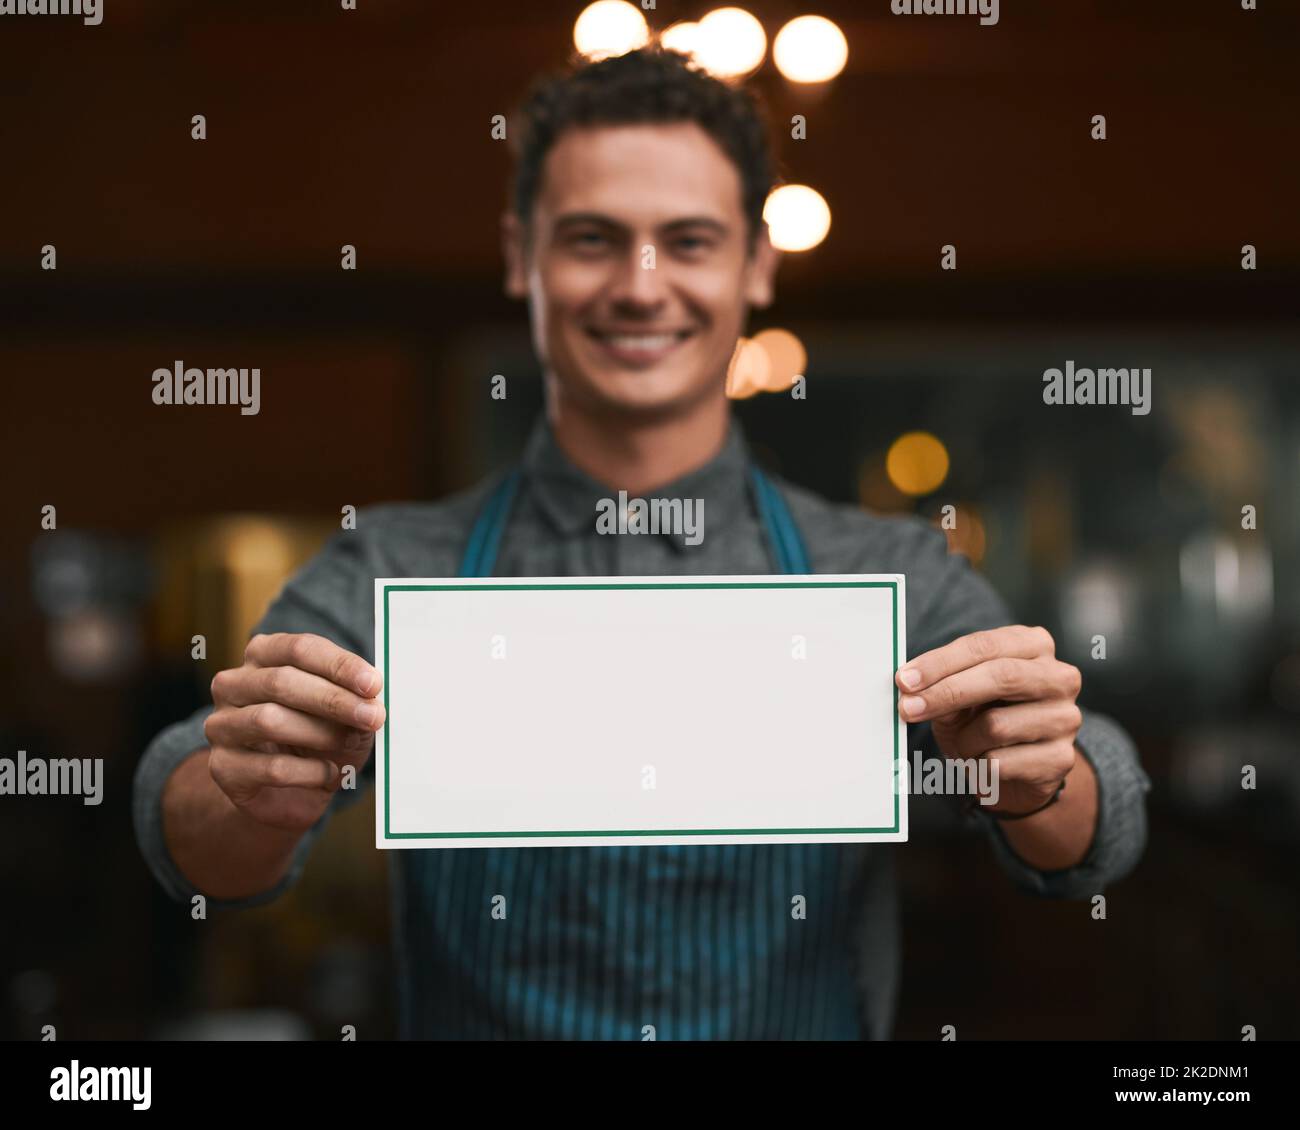 We will be glad if you can join us. Portrait of a cheerful young man holding a sign while standing inside of a beer brewery during the day. Stock Photo